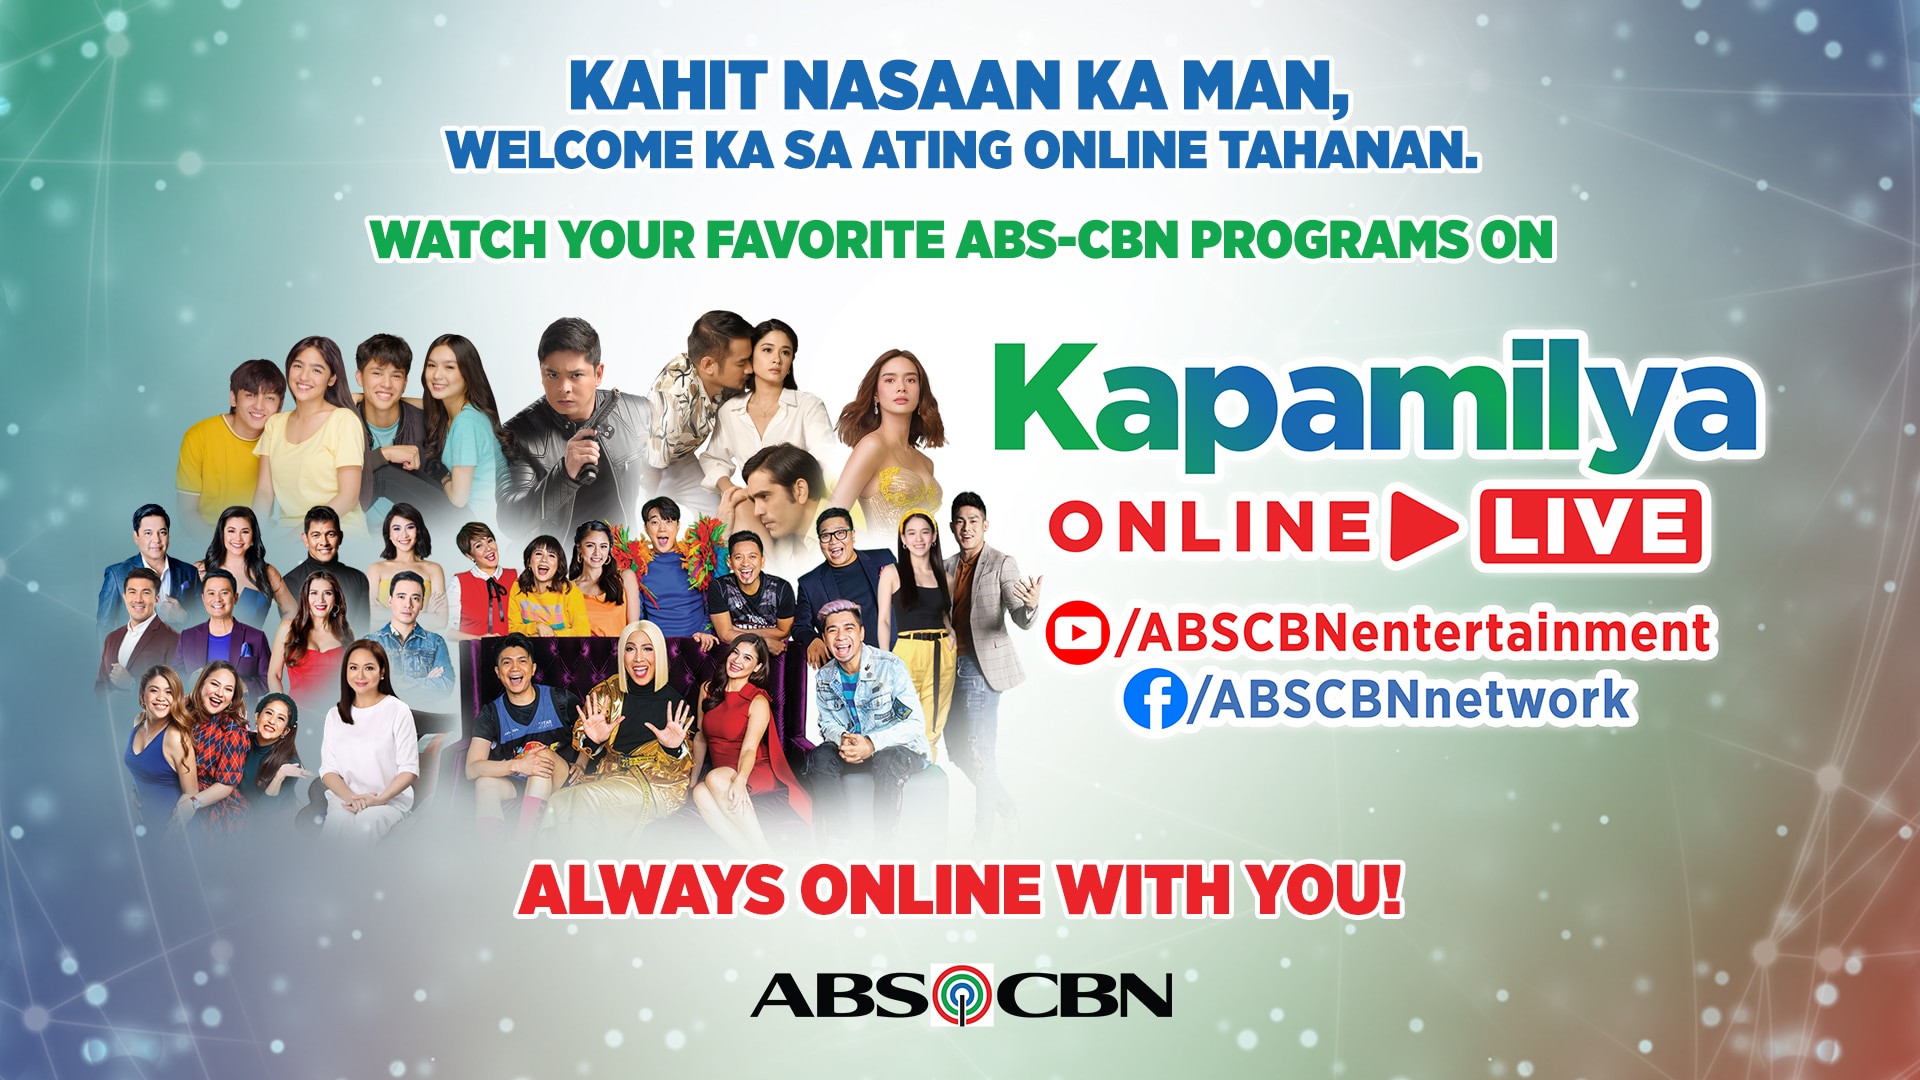 Kapamilya Online Live goes 24/7 in YouTube PH, now available in over 180 countries